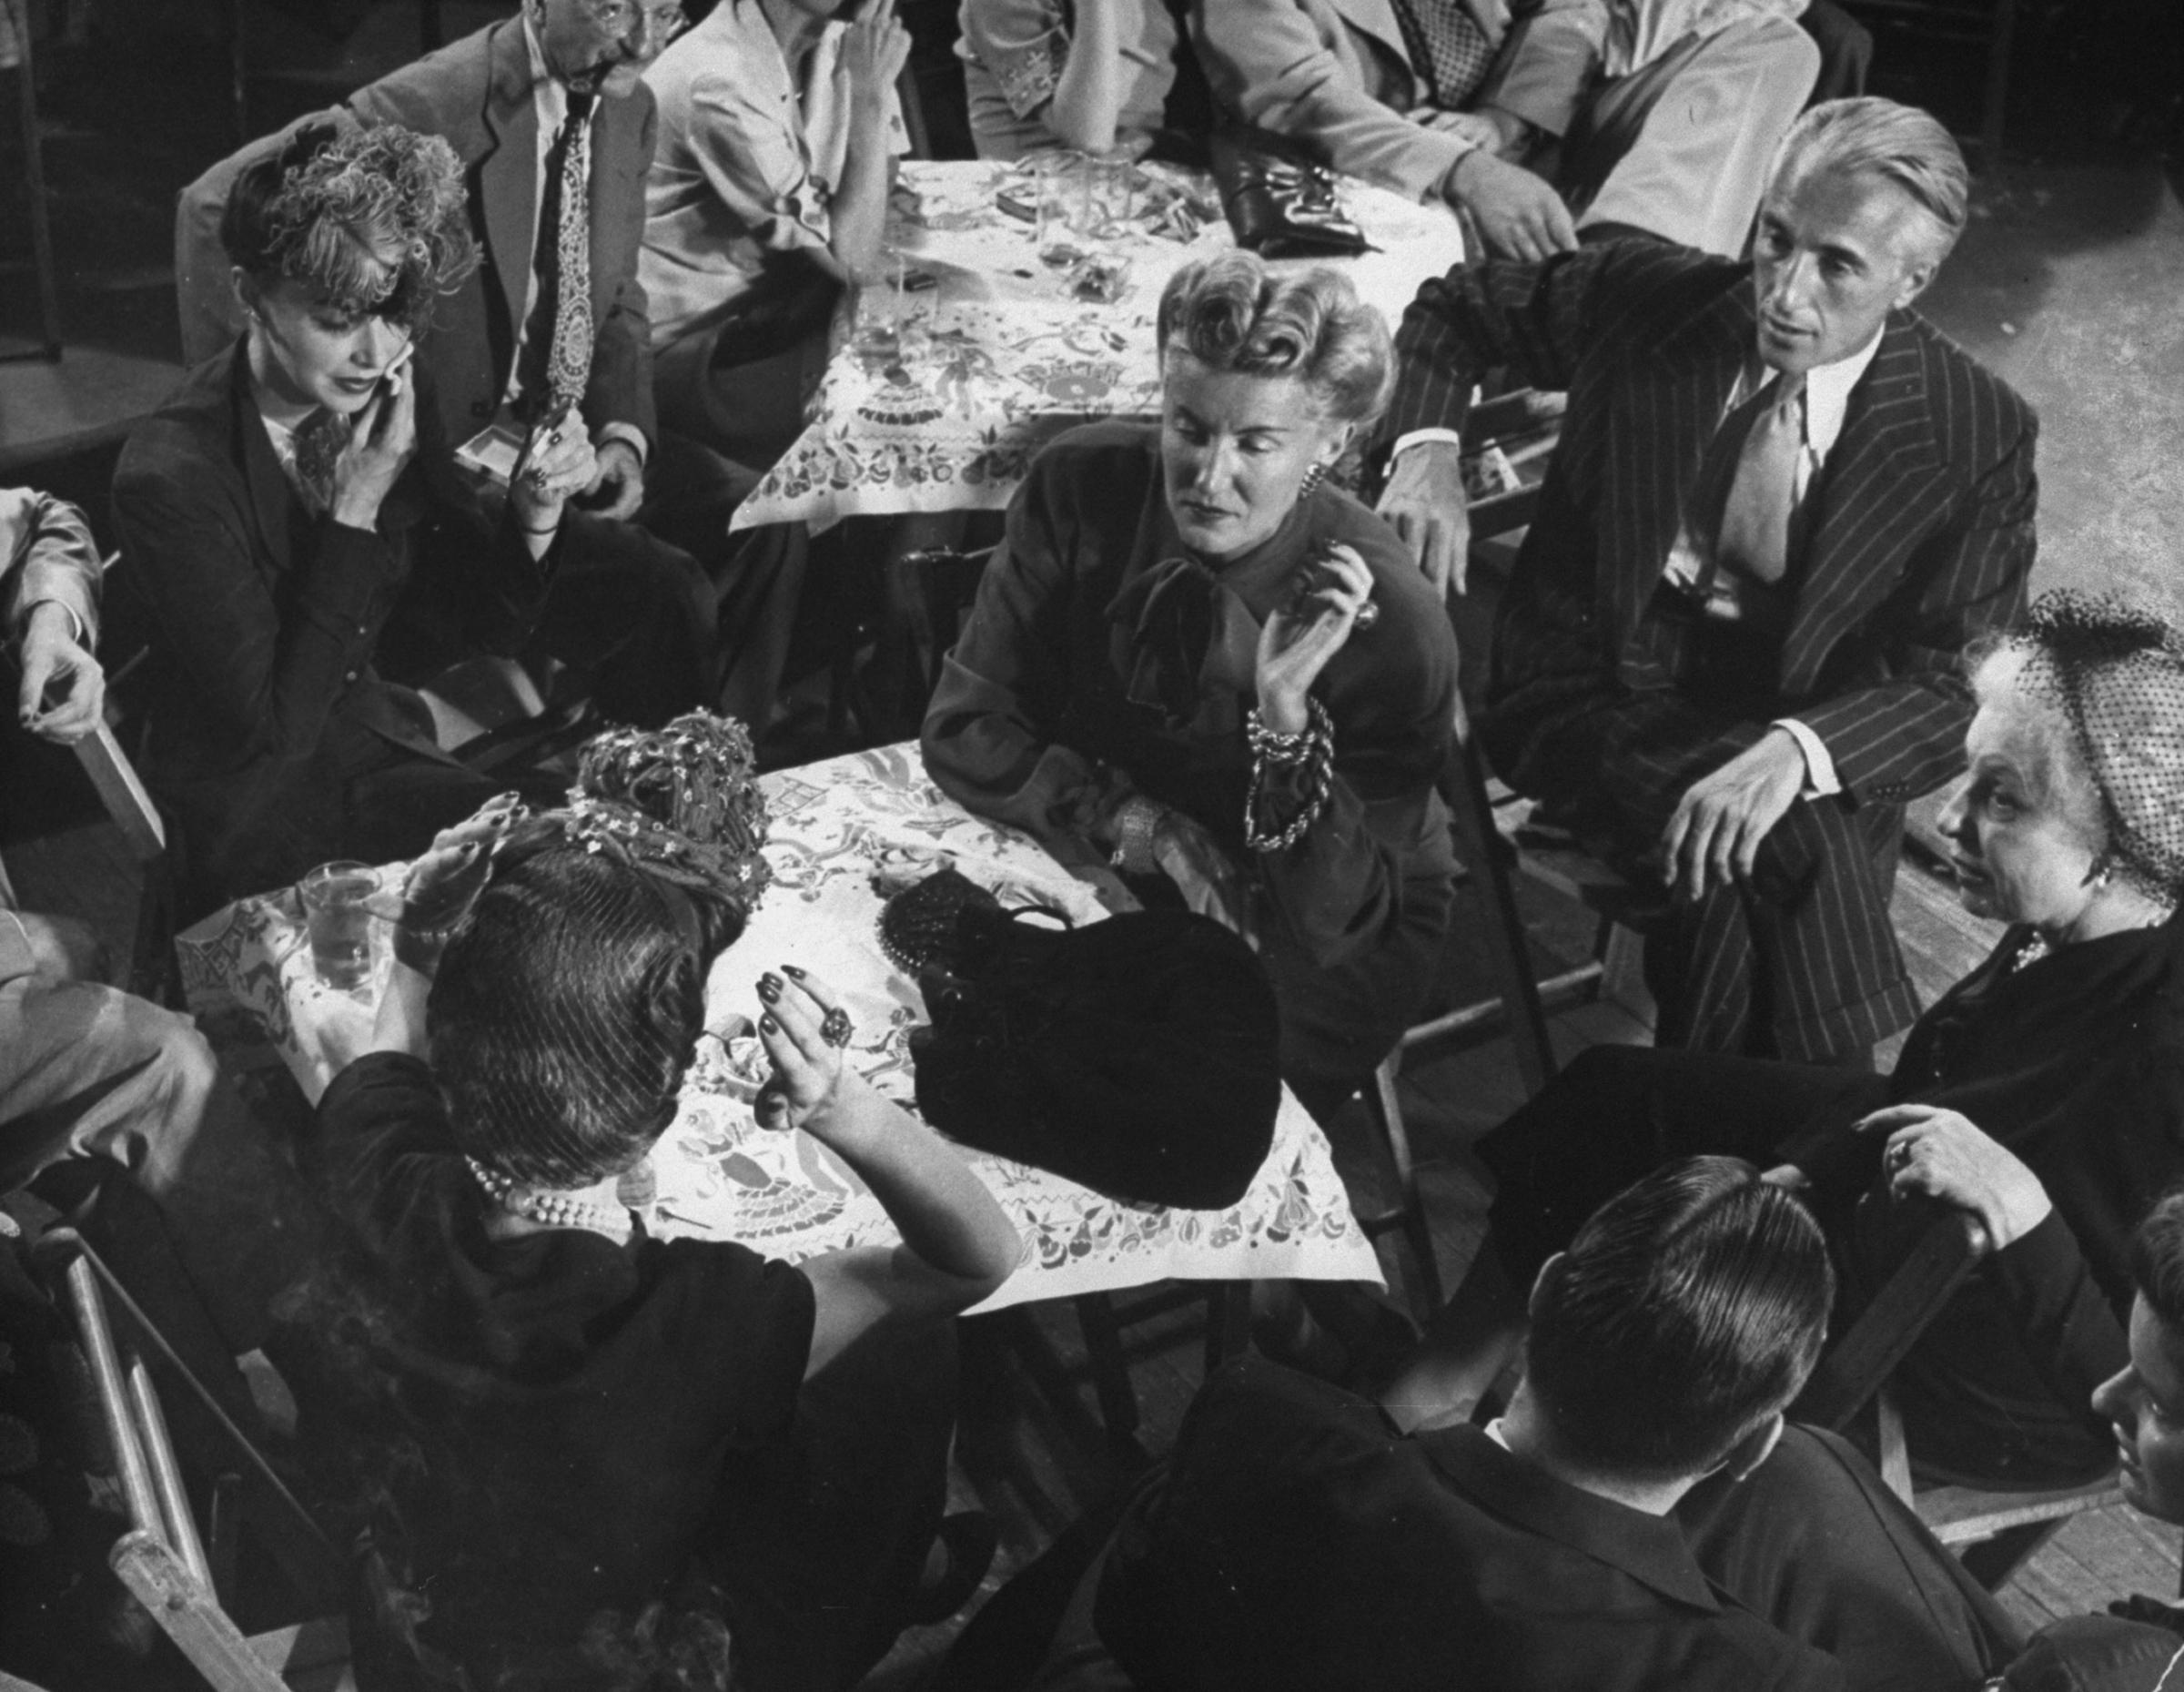 Conde Nast president Iva Patcevitch (in striped suit), Vogue editor-in-chief Edna Woolman Chase (far right, in hat) and other media types hang out at Gjon Mili's studio during a jam session, 1943.